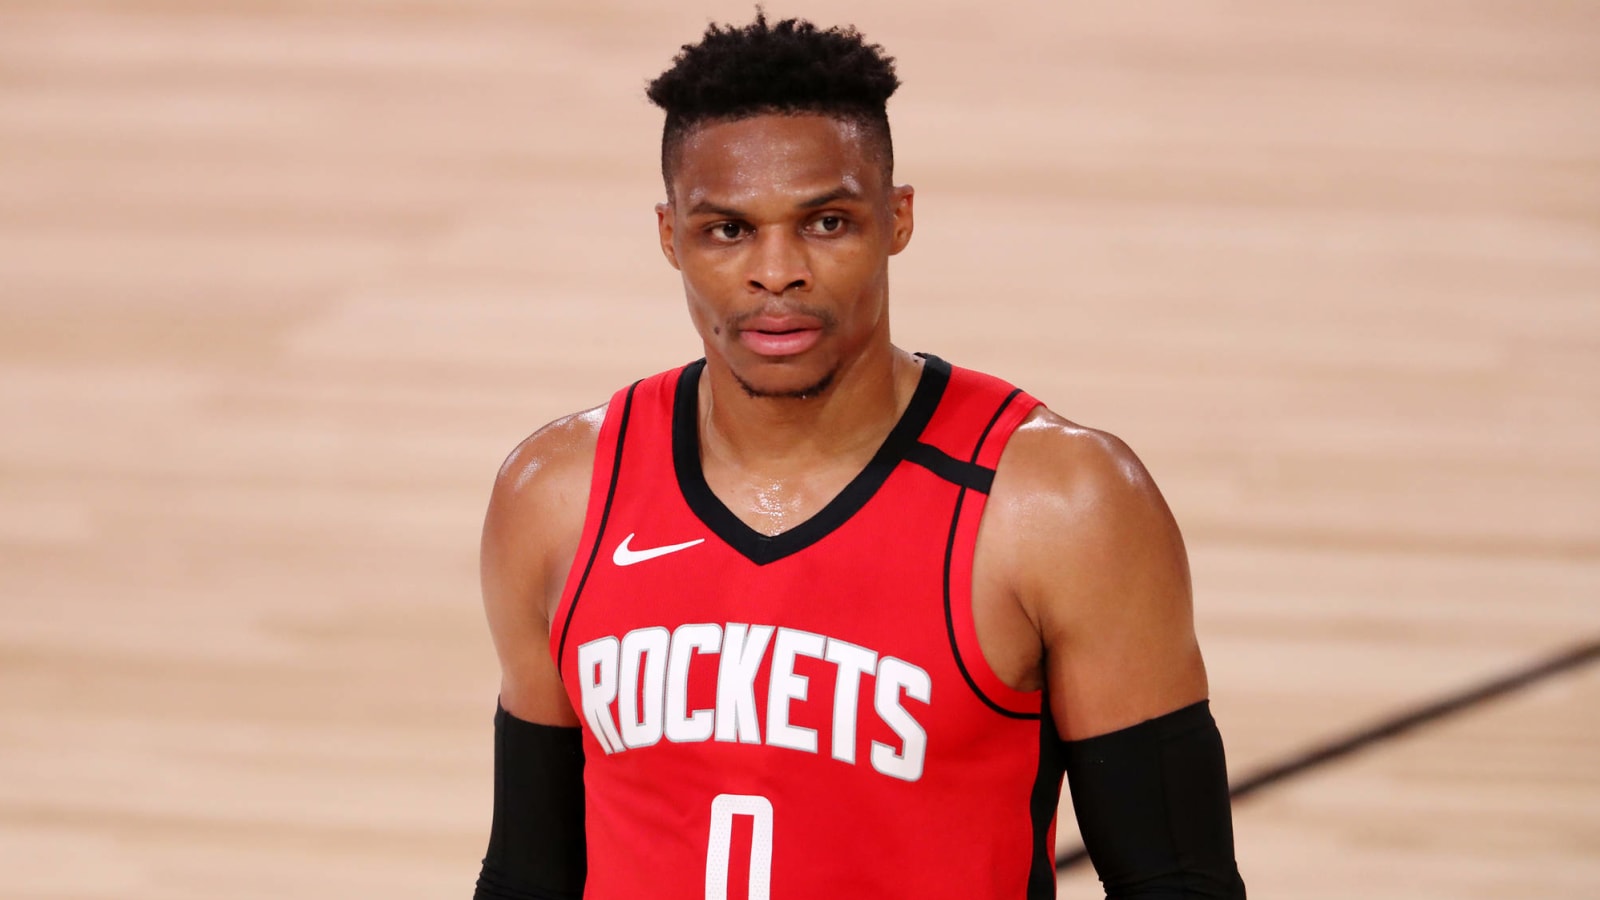 Wizards share photos of Russell Westbrook in uniform